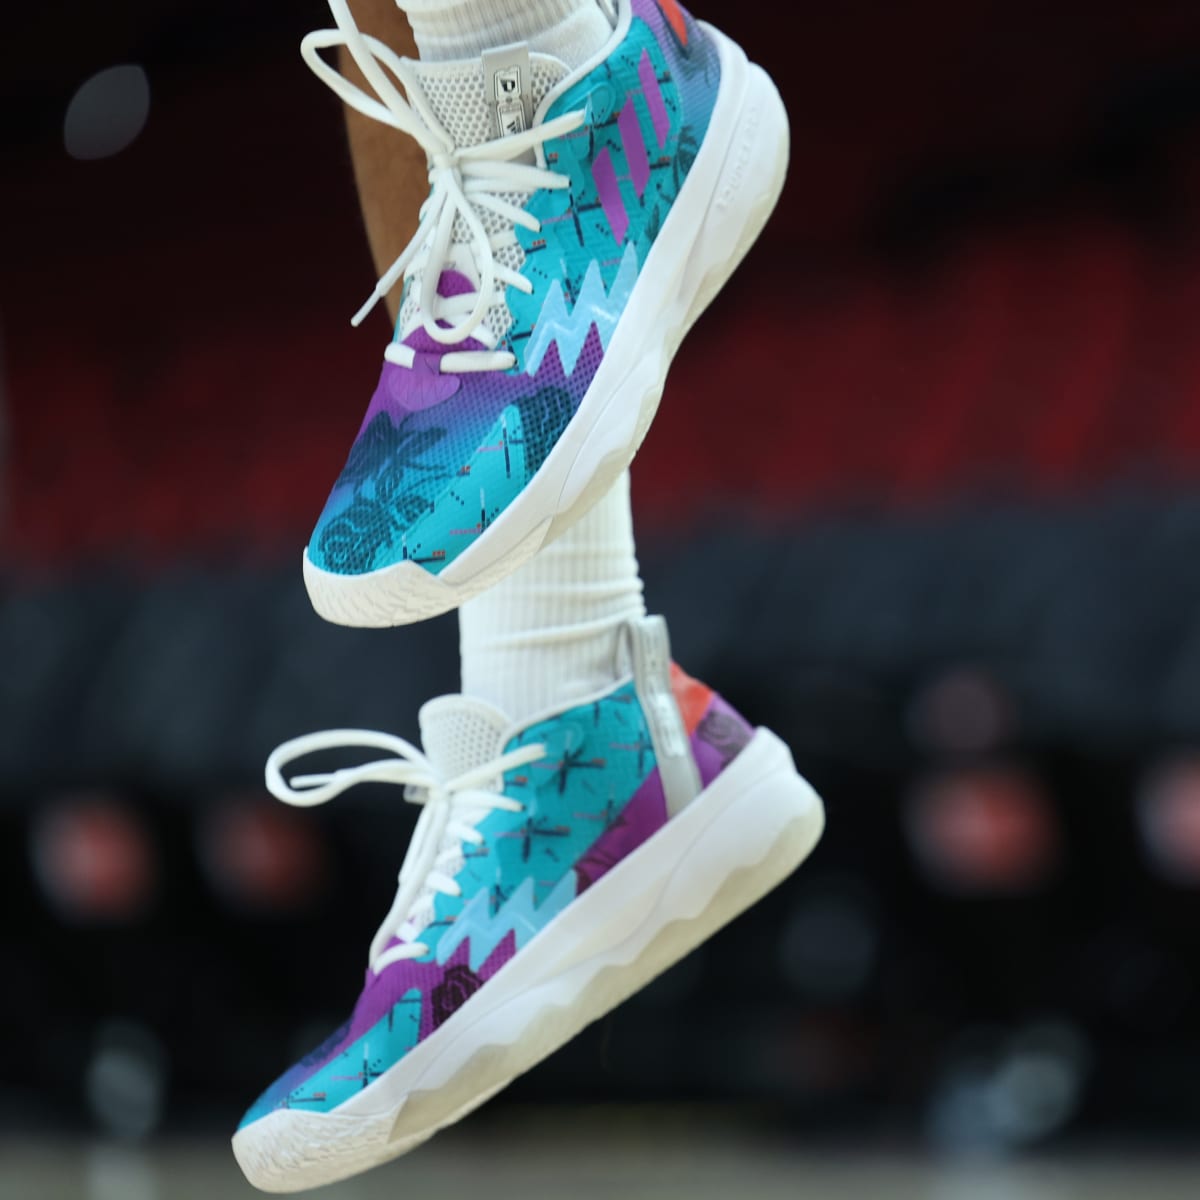 analogi Forsømme velfærd Damian Lillard Debuts Adidas Shoes in 'PDX' Colorway - Sports Illustrated  FanNation Kicks News, Analysis and More